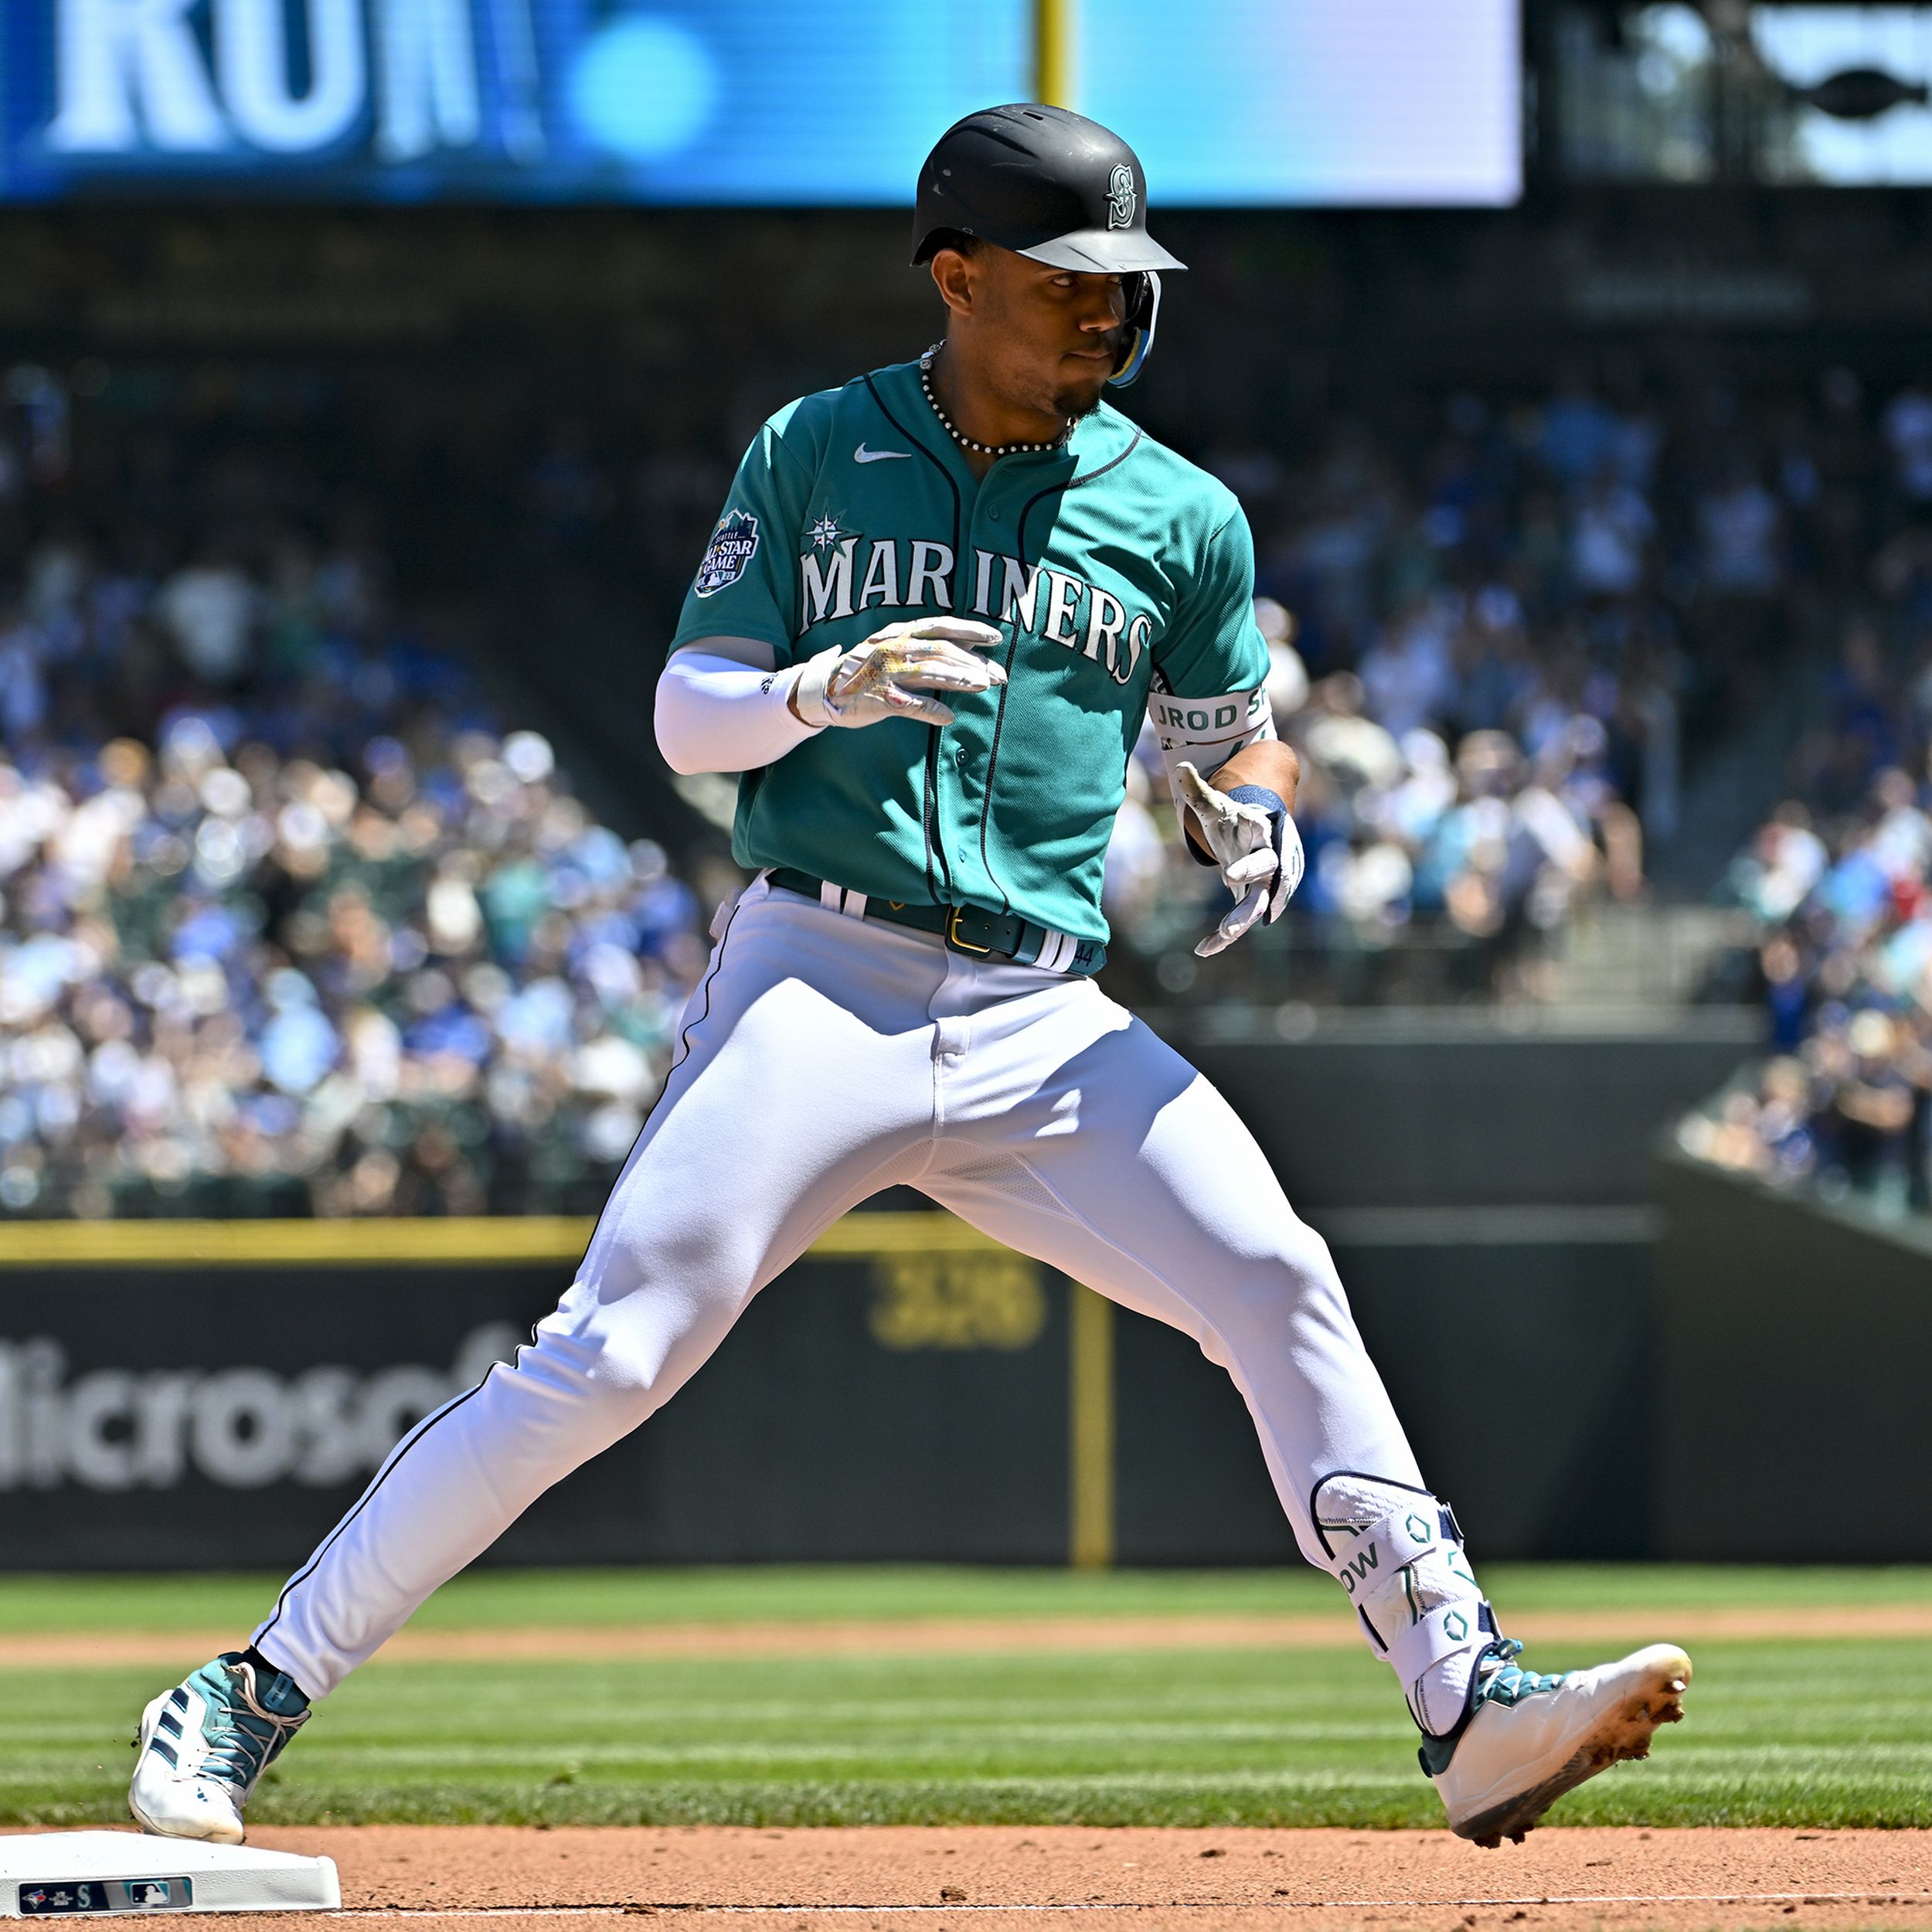 Mariners continue to find that extra-inning magic